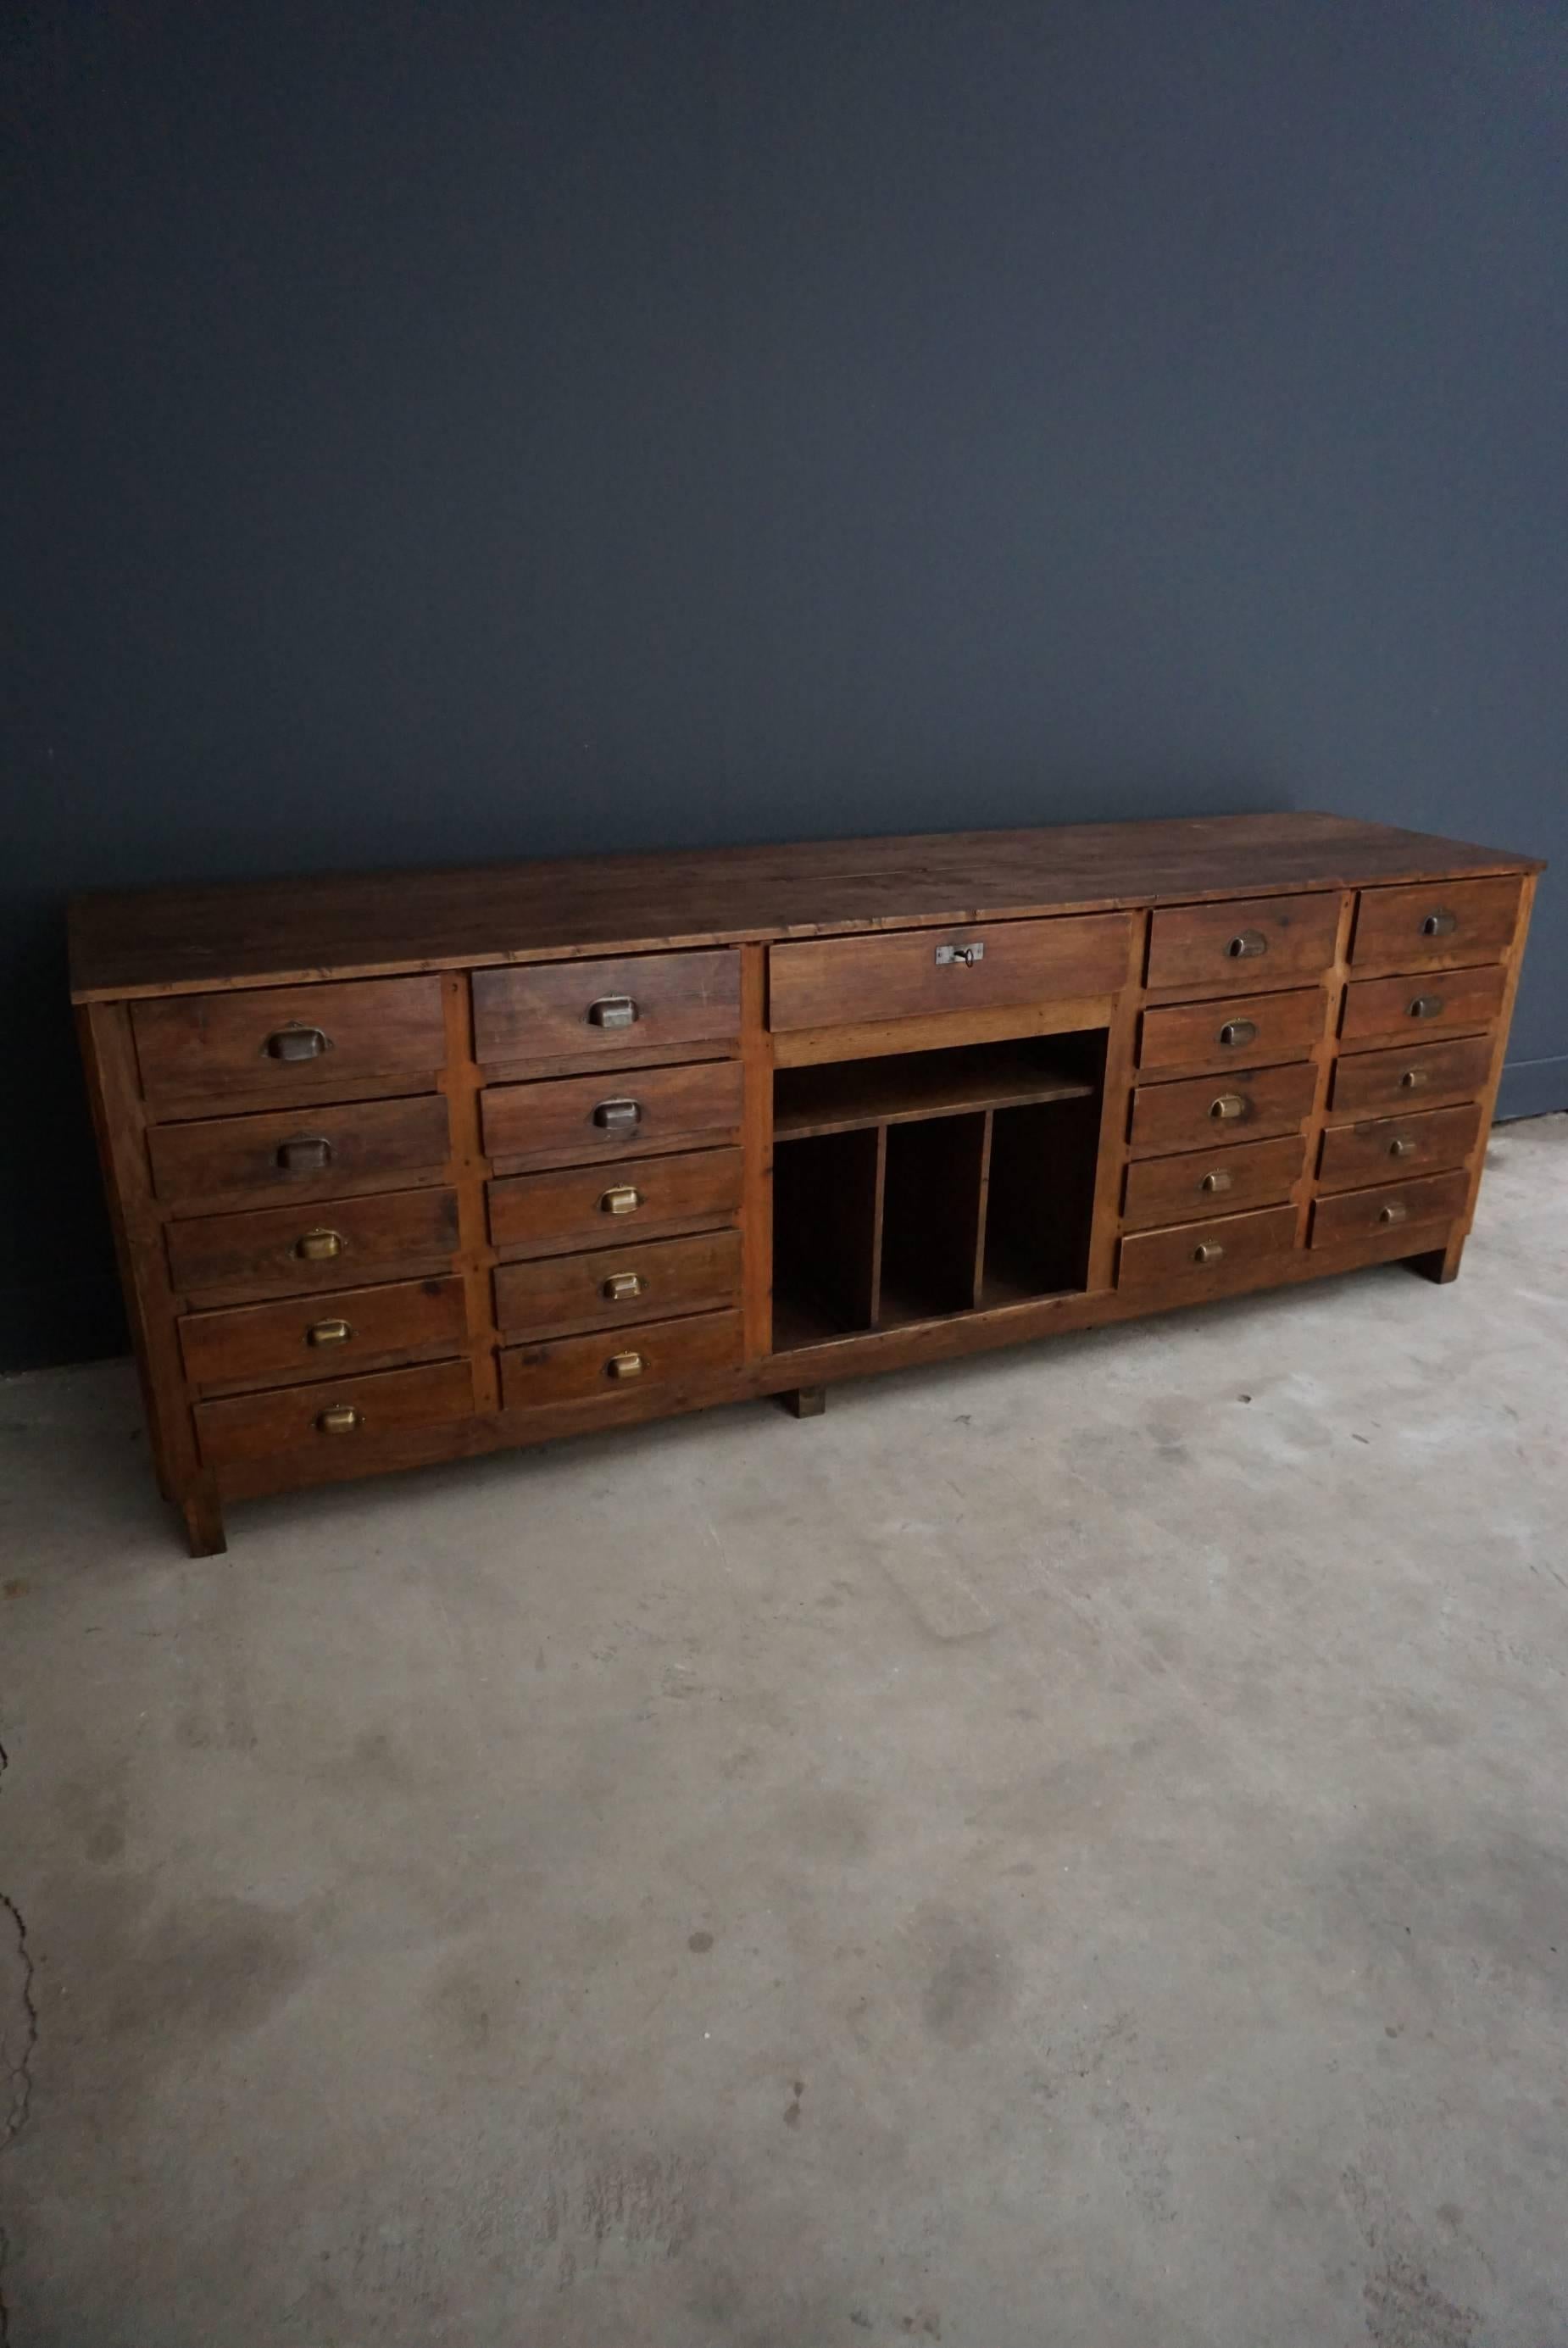 This restored apothecary bank of drawers was designed and made around the 1950s. It is made from pine and features different drawers and shelves. It was previously used as a shop counter.